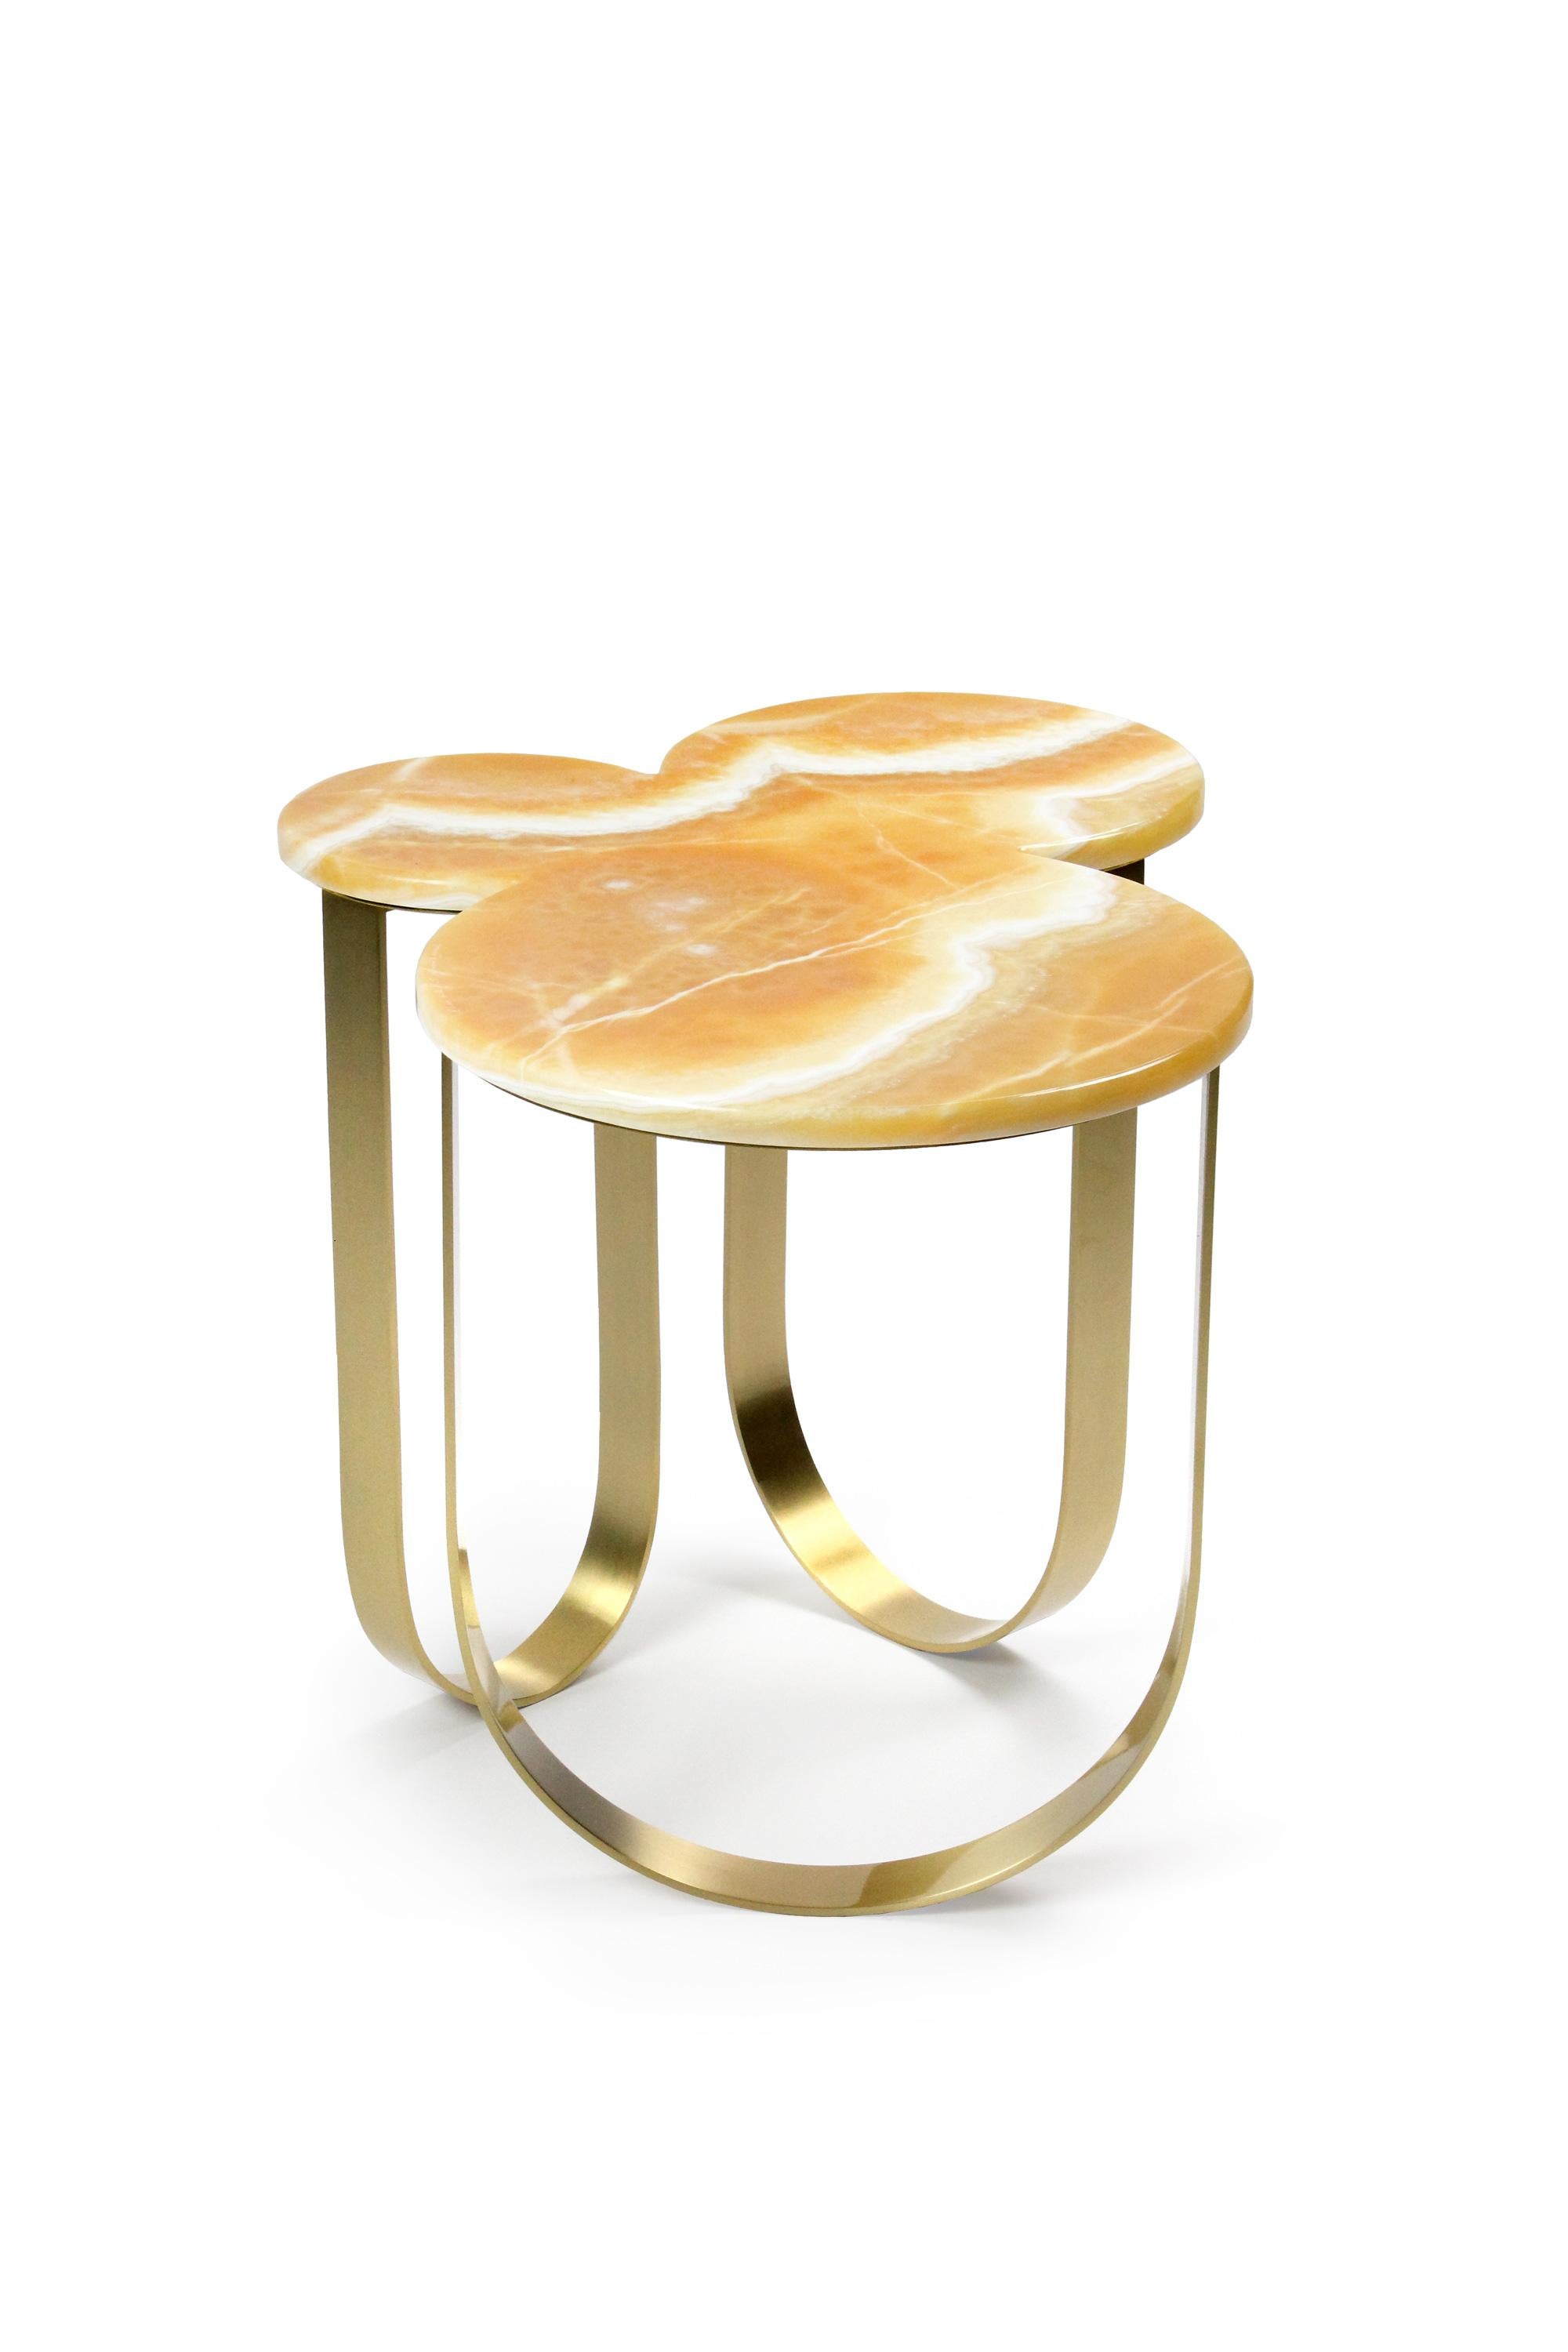 The 'Cloud' is a spectacular side table with structure in brushed brass and top in rare orange onyx. The brushed finishing of the brass creates interesting reflections of light. 

Table dimension: L 73 x W 54 x H 50 cm. Dimensions are